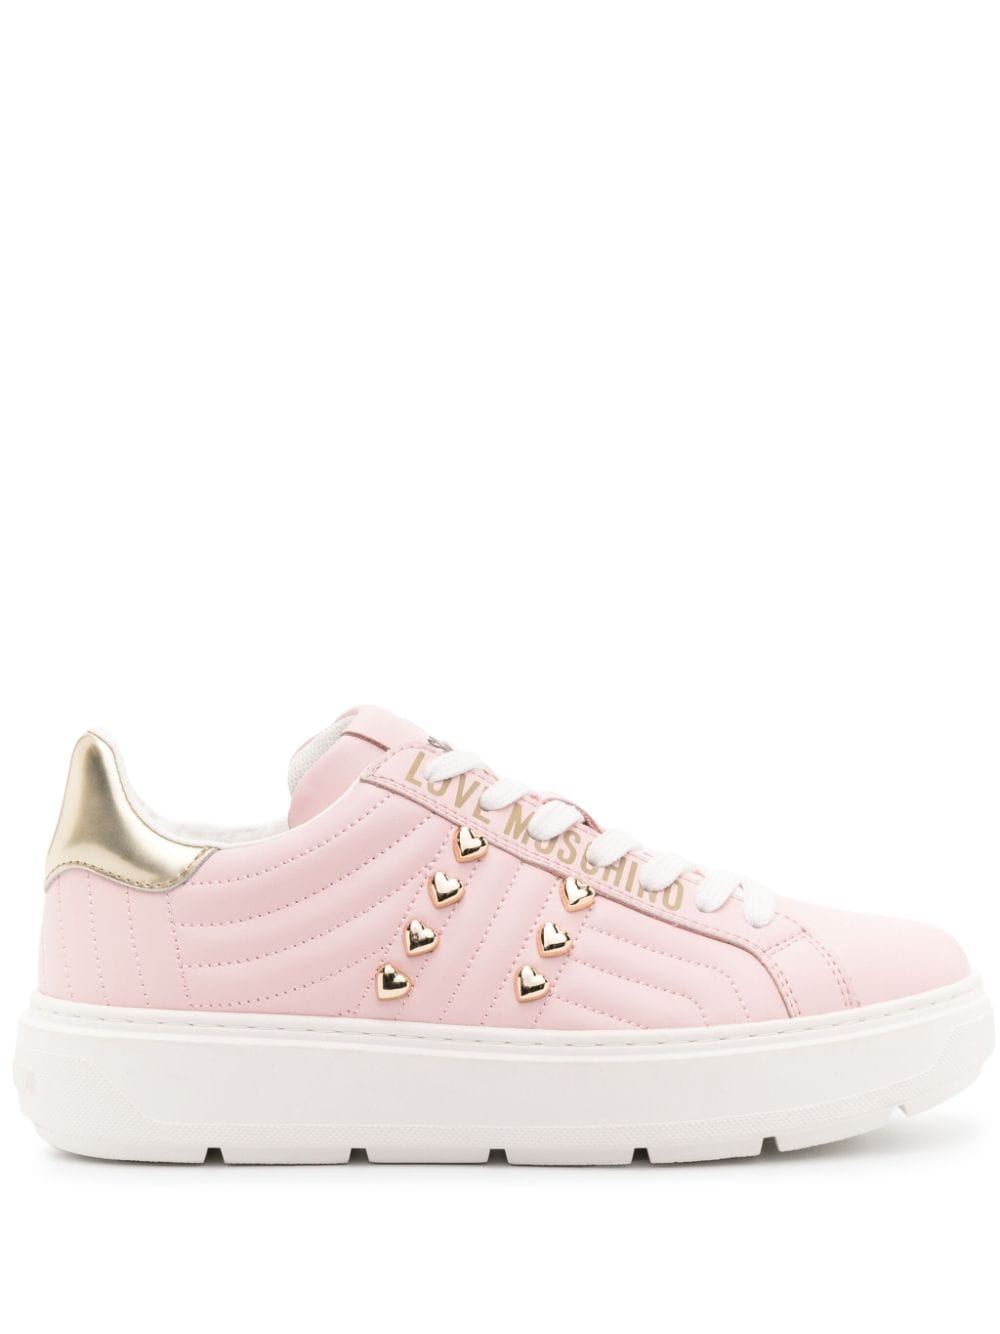 Love Moschino stud-embellished leather sneakers - Pink von Love Moschino